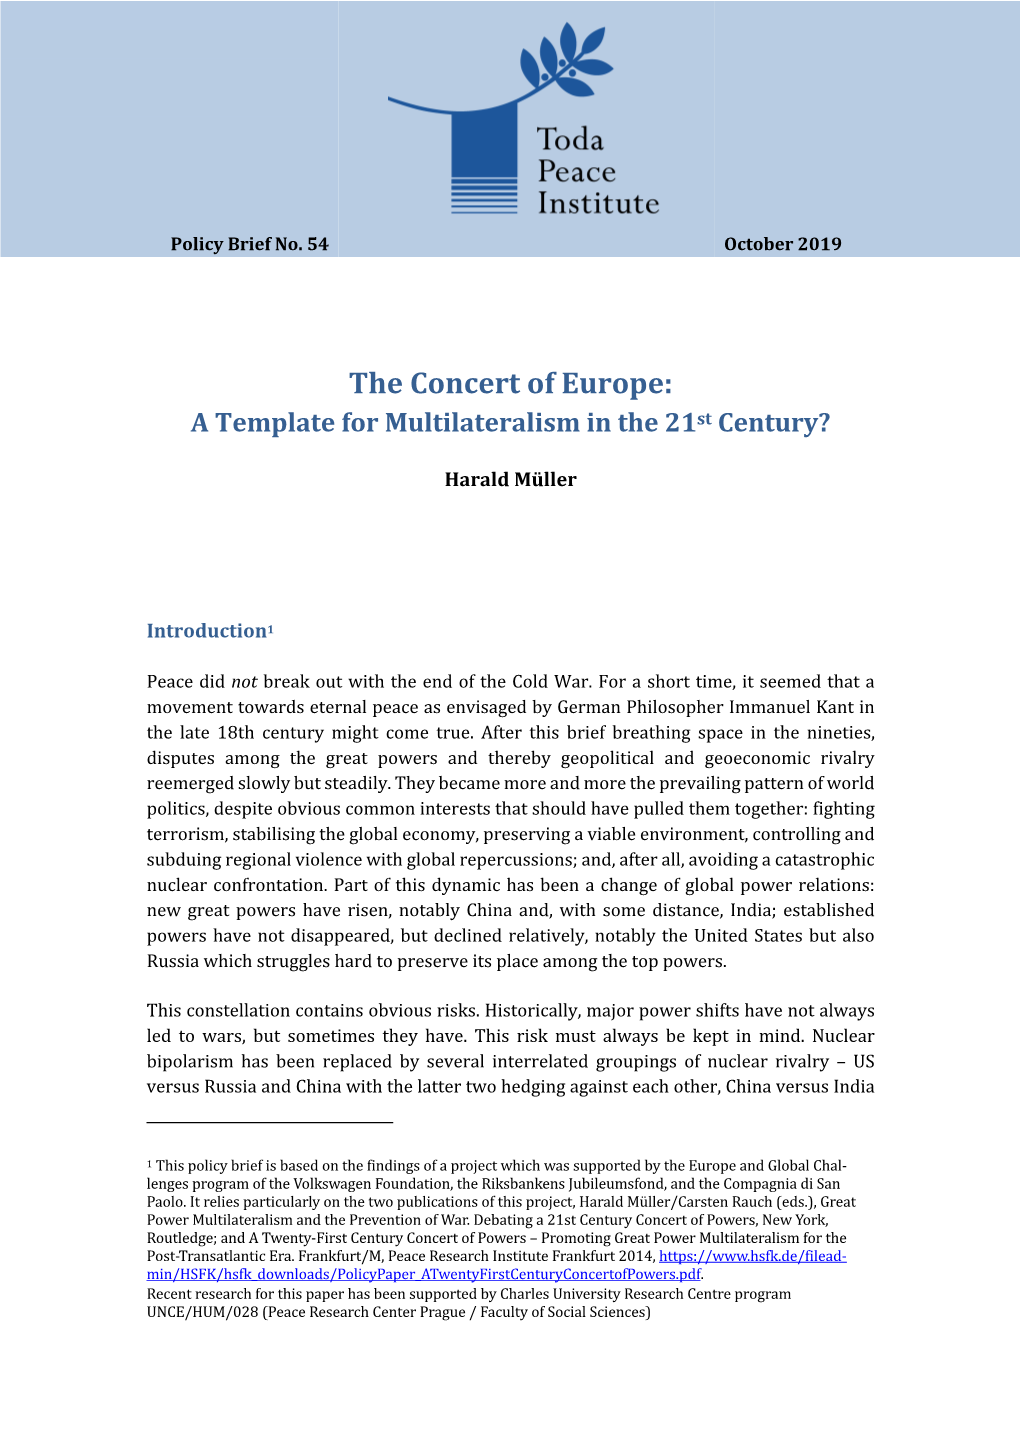 The Concert of Europe: a Template for Multilateralism in the 21St Century?